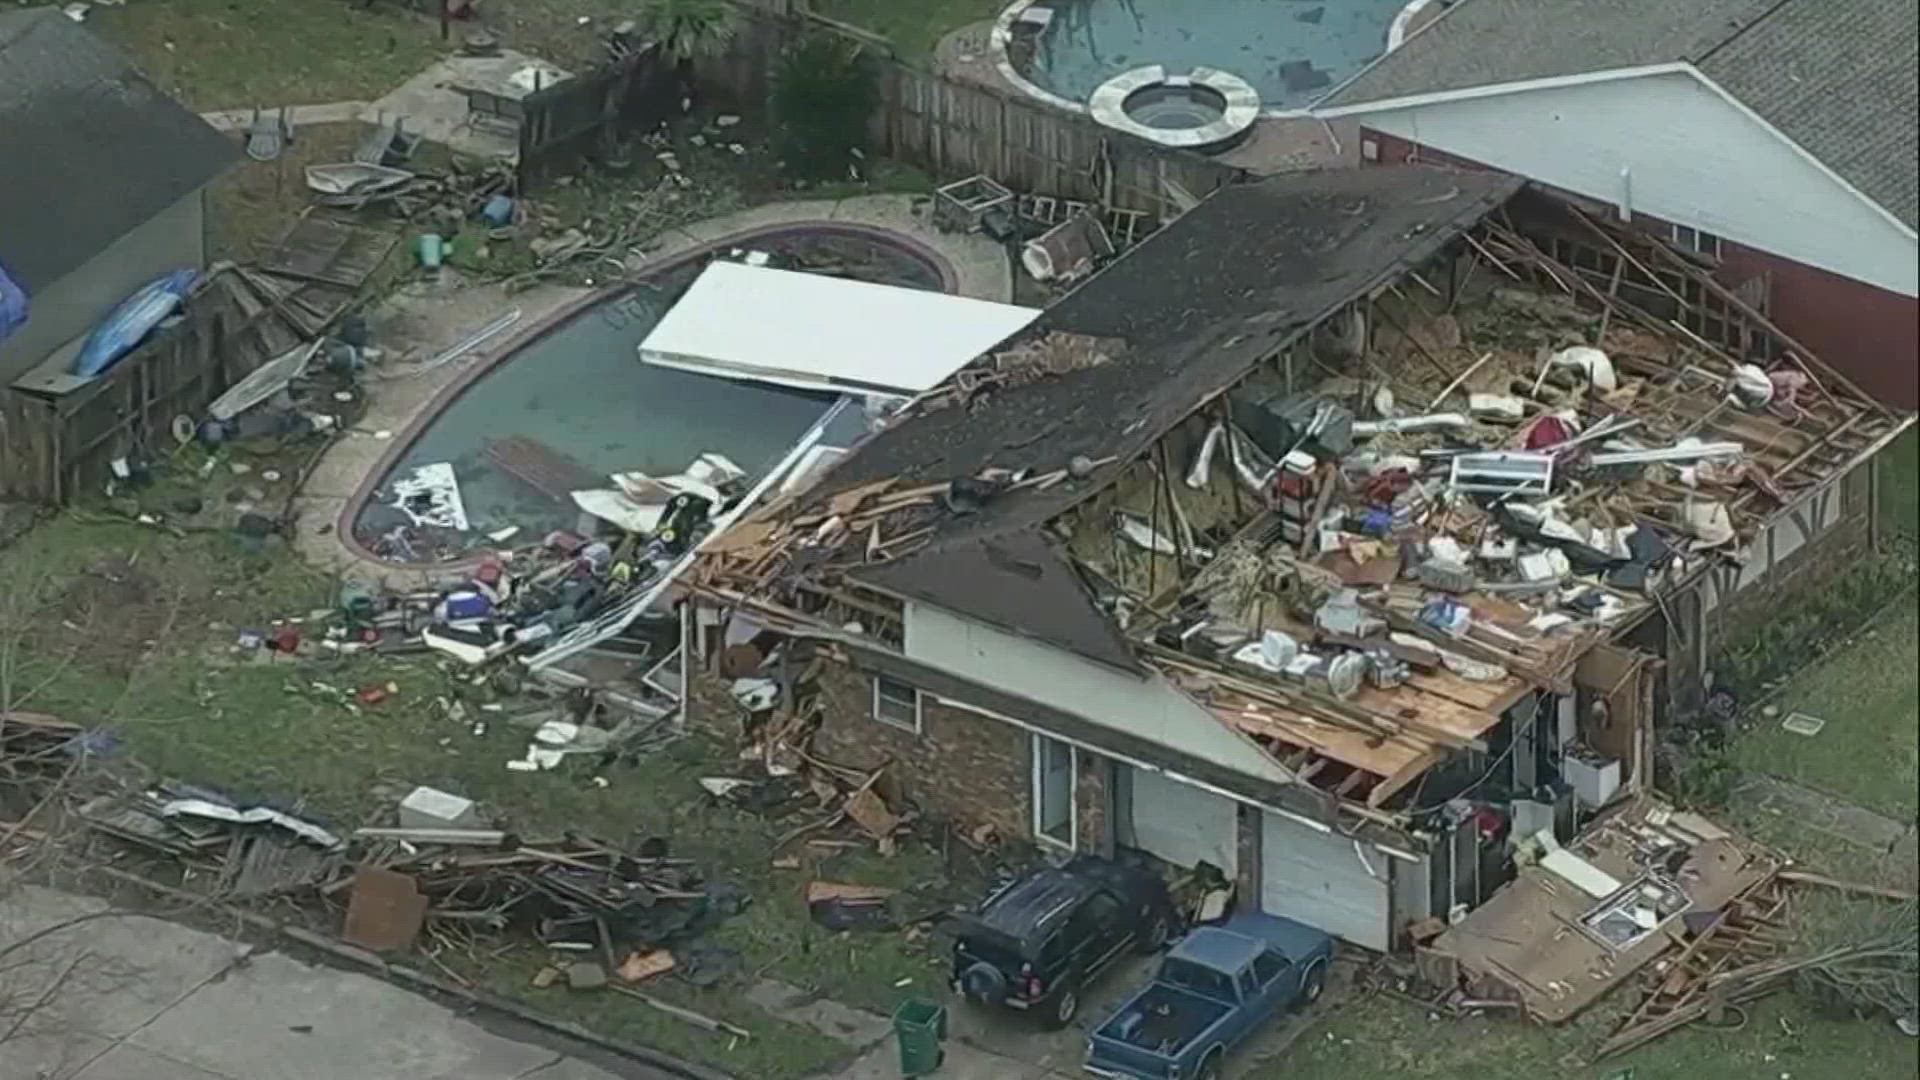 Here's a further look at the tornado damage seen in Houston on Tuesday.